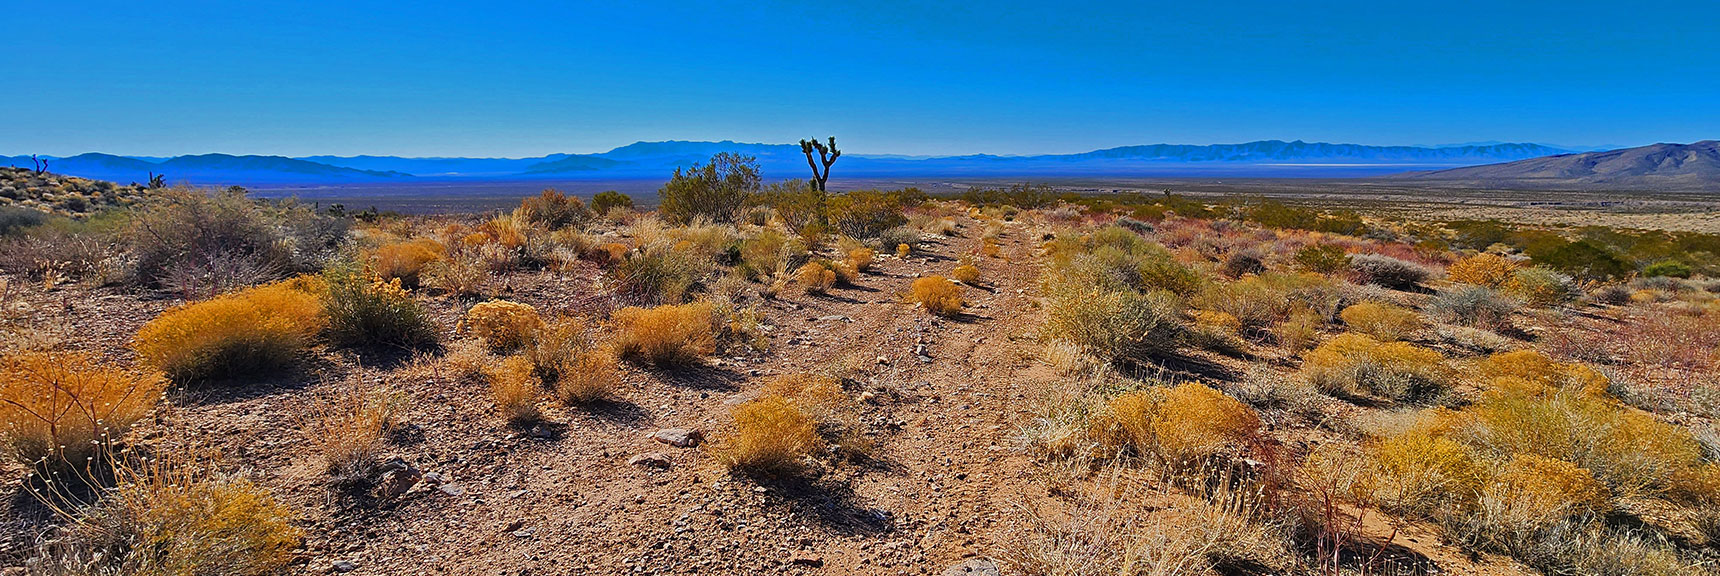 This Road Extension Leads West to CC Spring Road. Not for Today. | Landmark Bluff Circuit | Lovell Canyon, Nevada